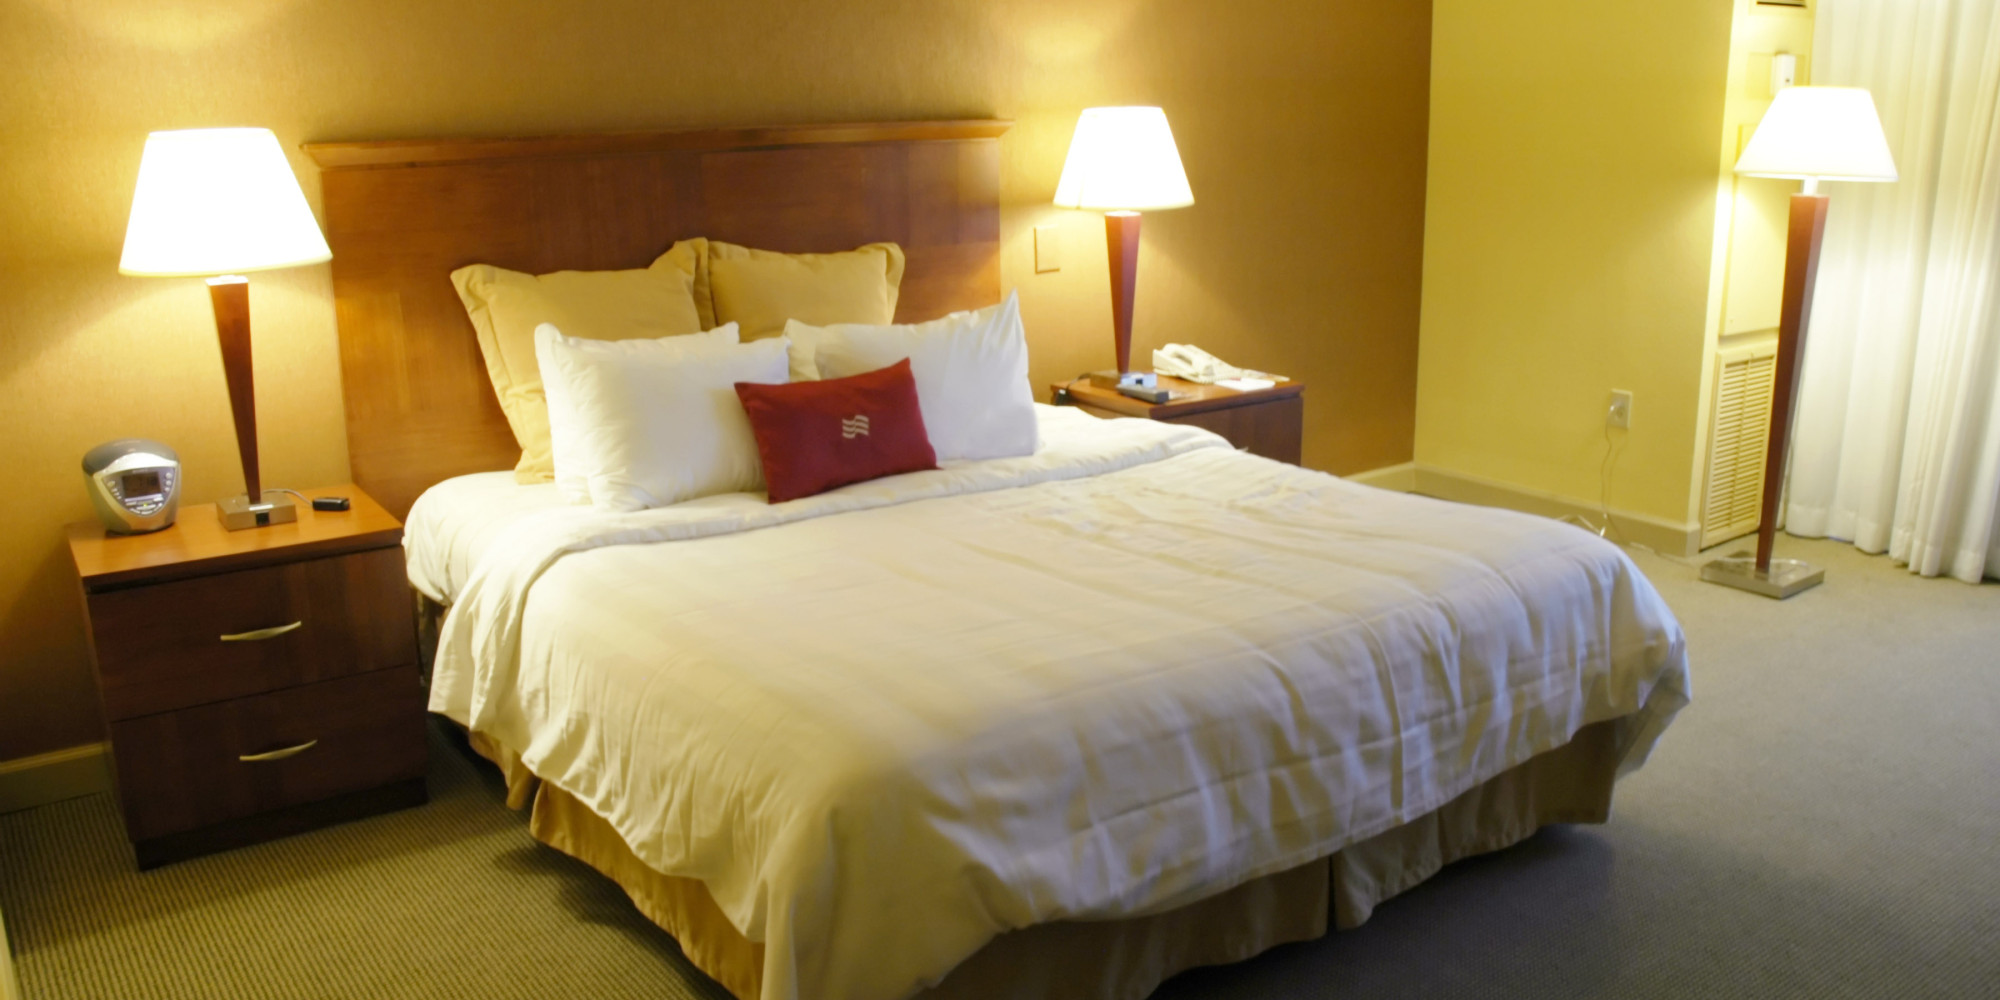 How Hotels Are Engineering A Better Night's Sleep | HuffPost